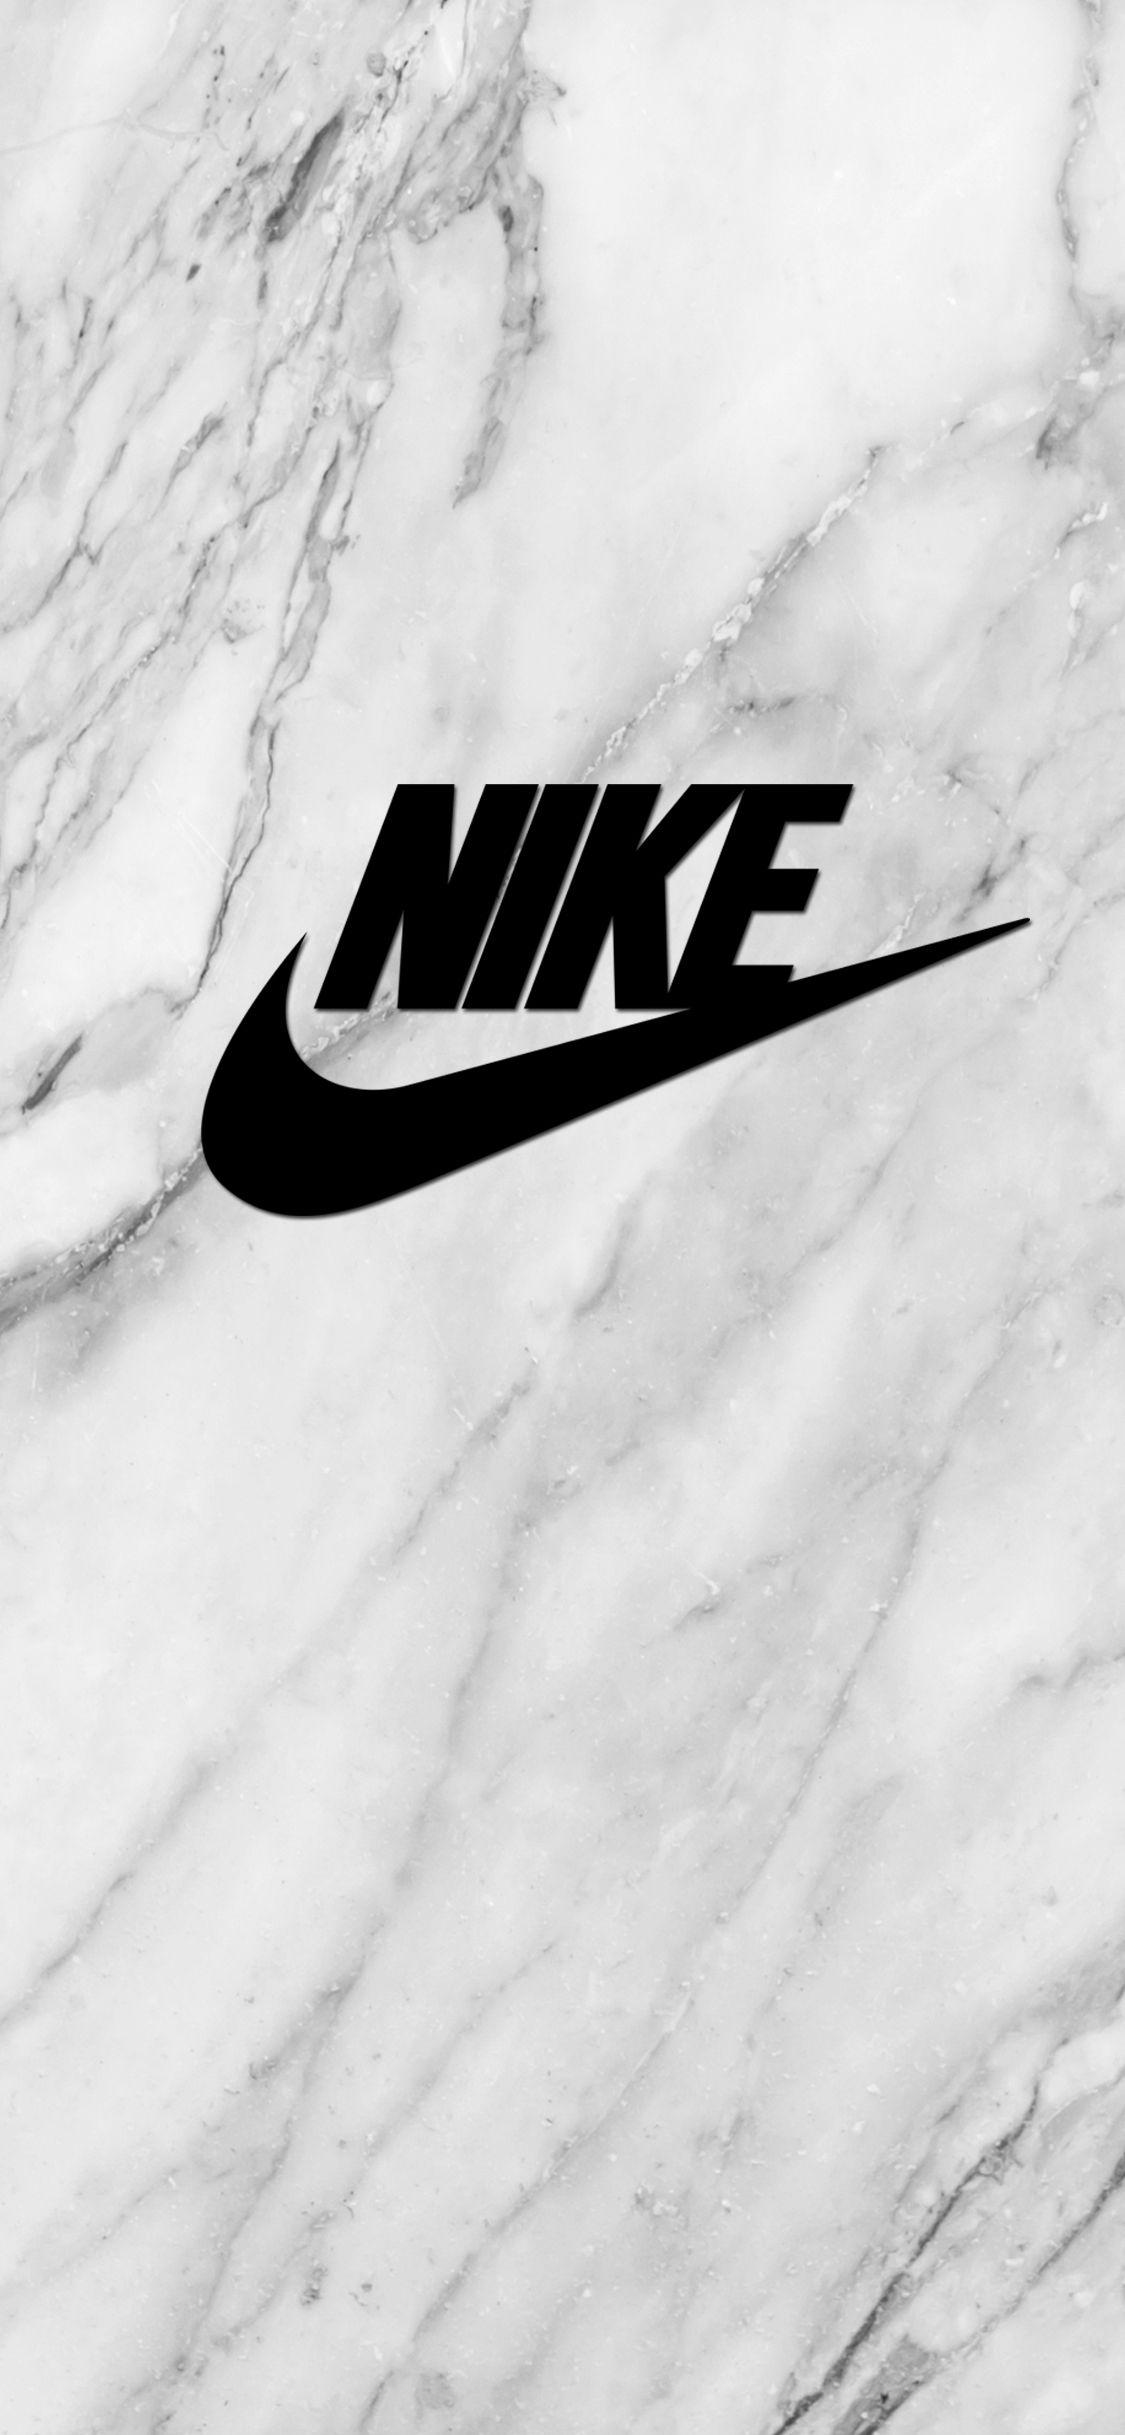 Nike iPhone X wallpaper You can order iphone case with this